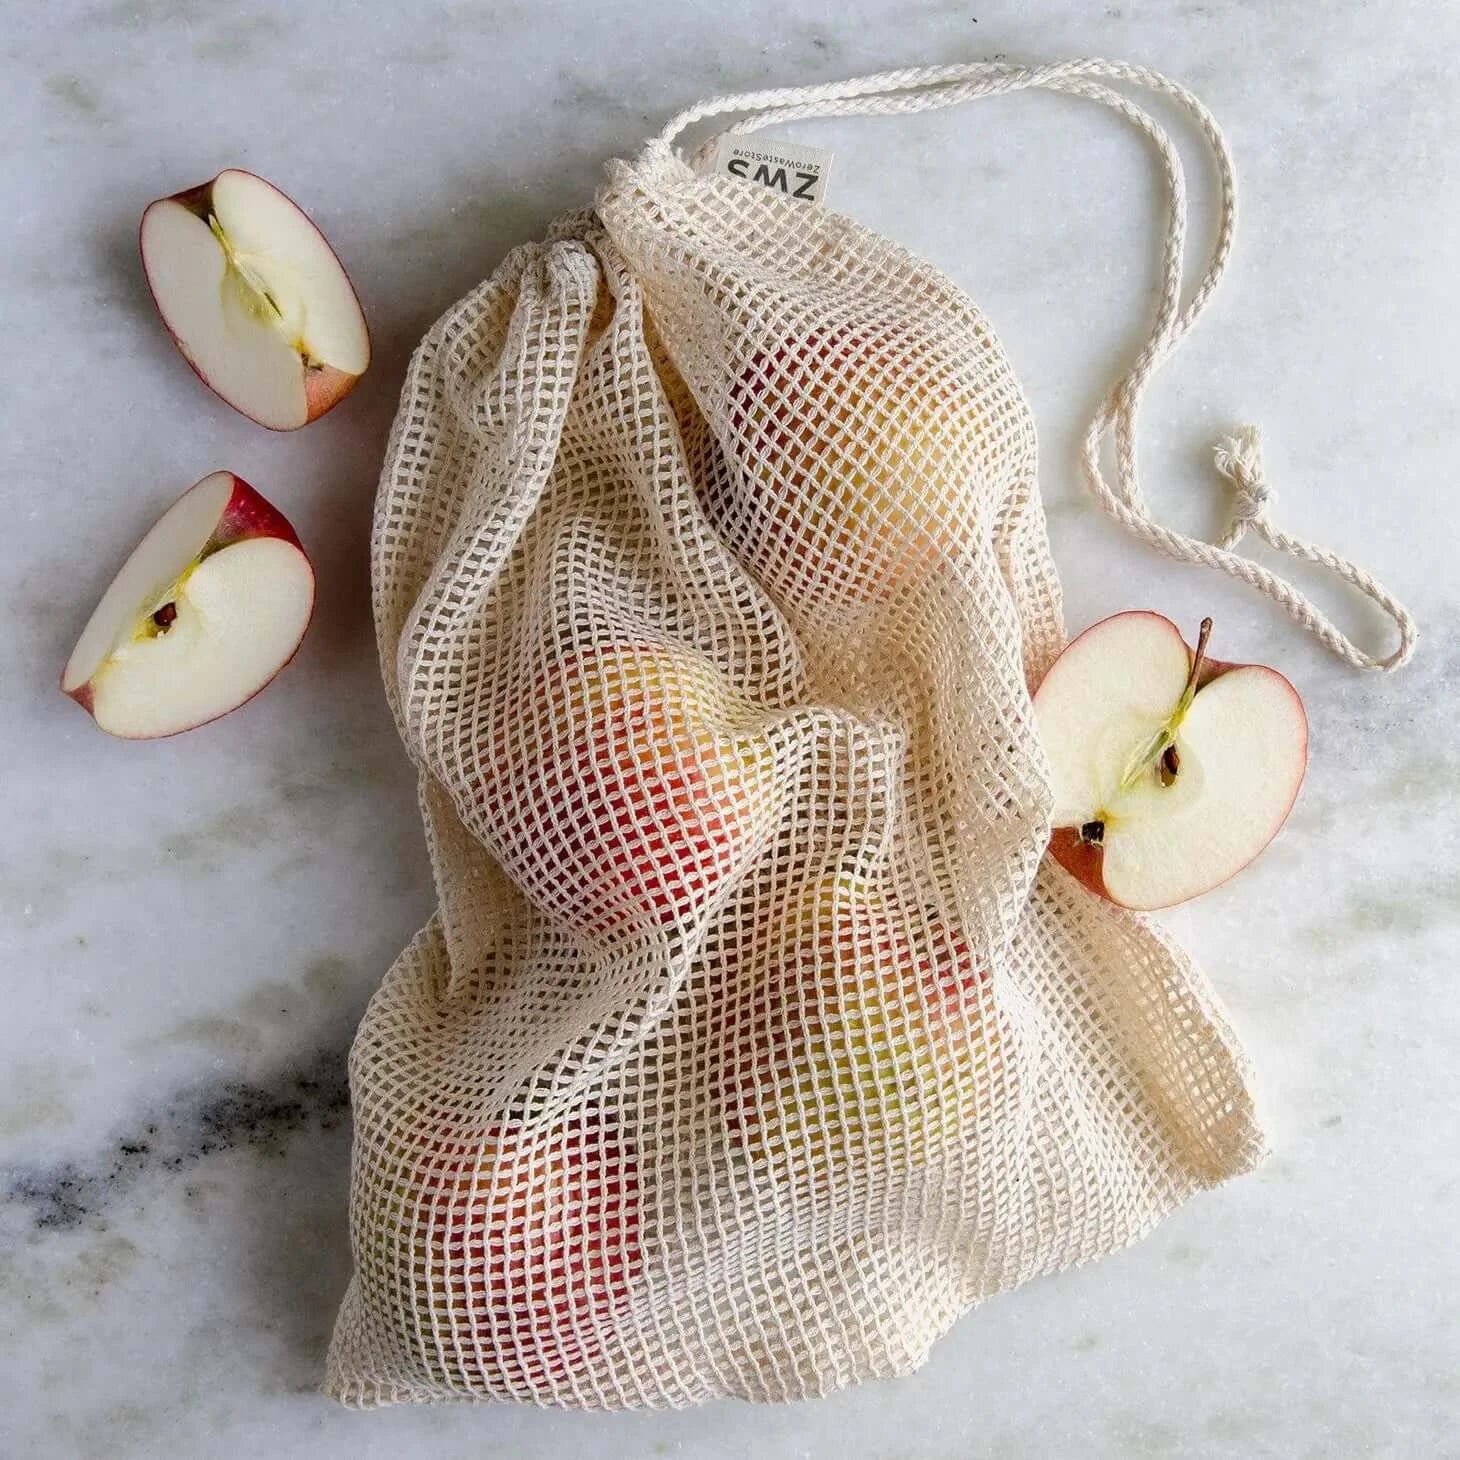 large organic cotton produce bag with apples inside